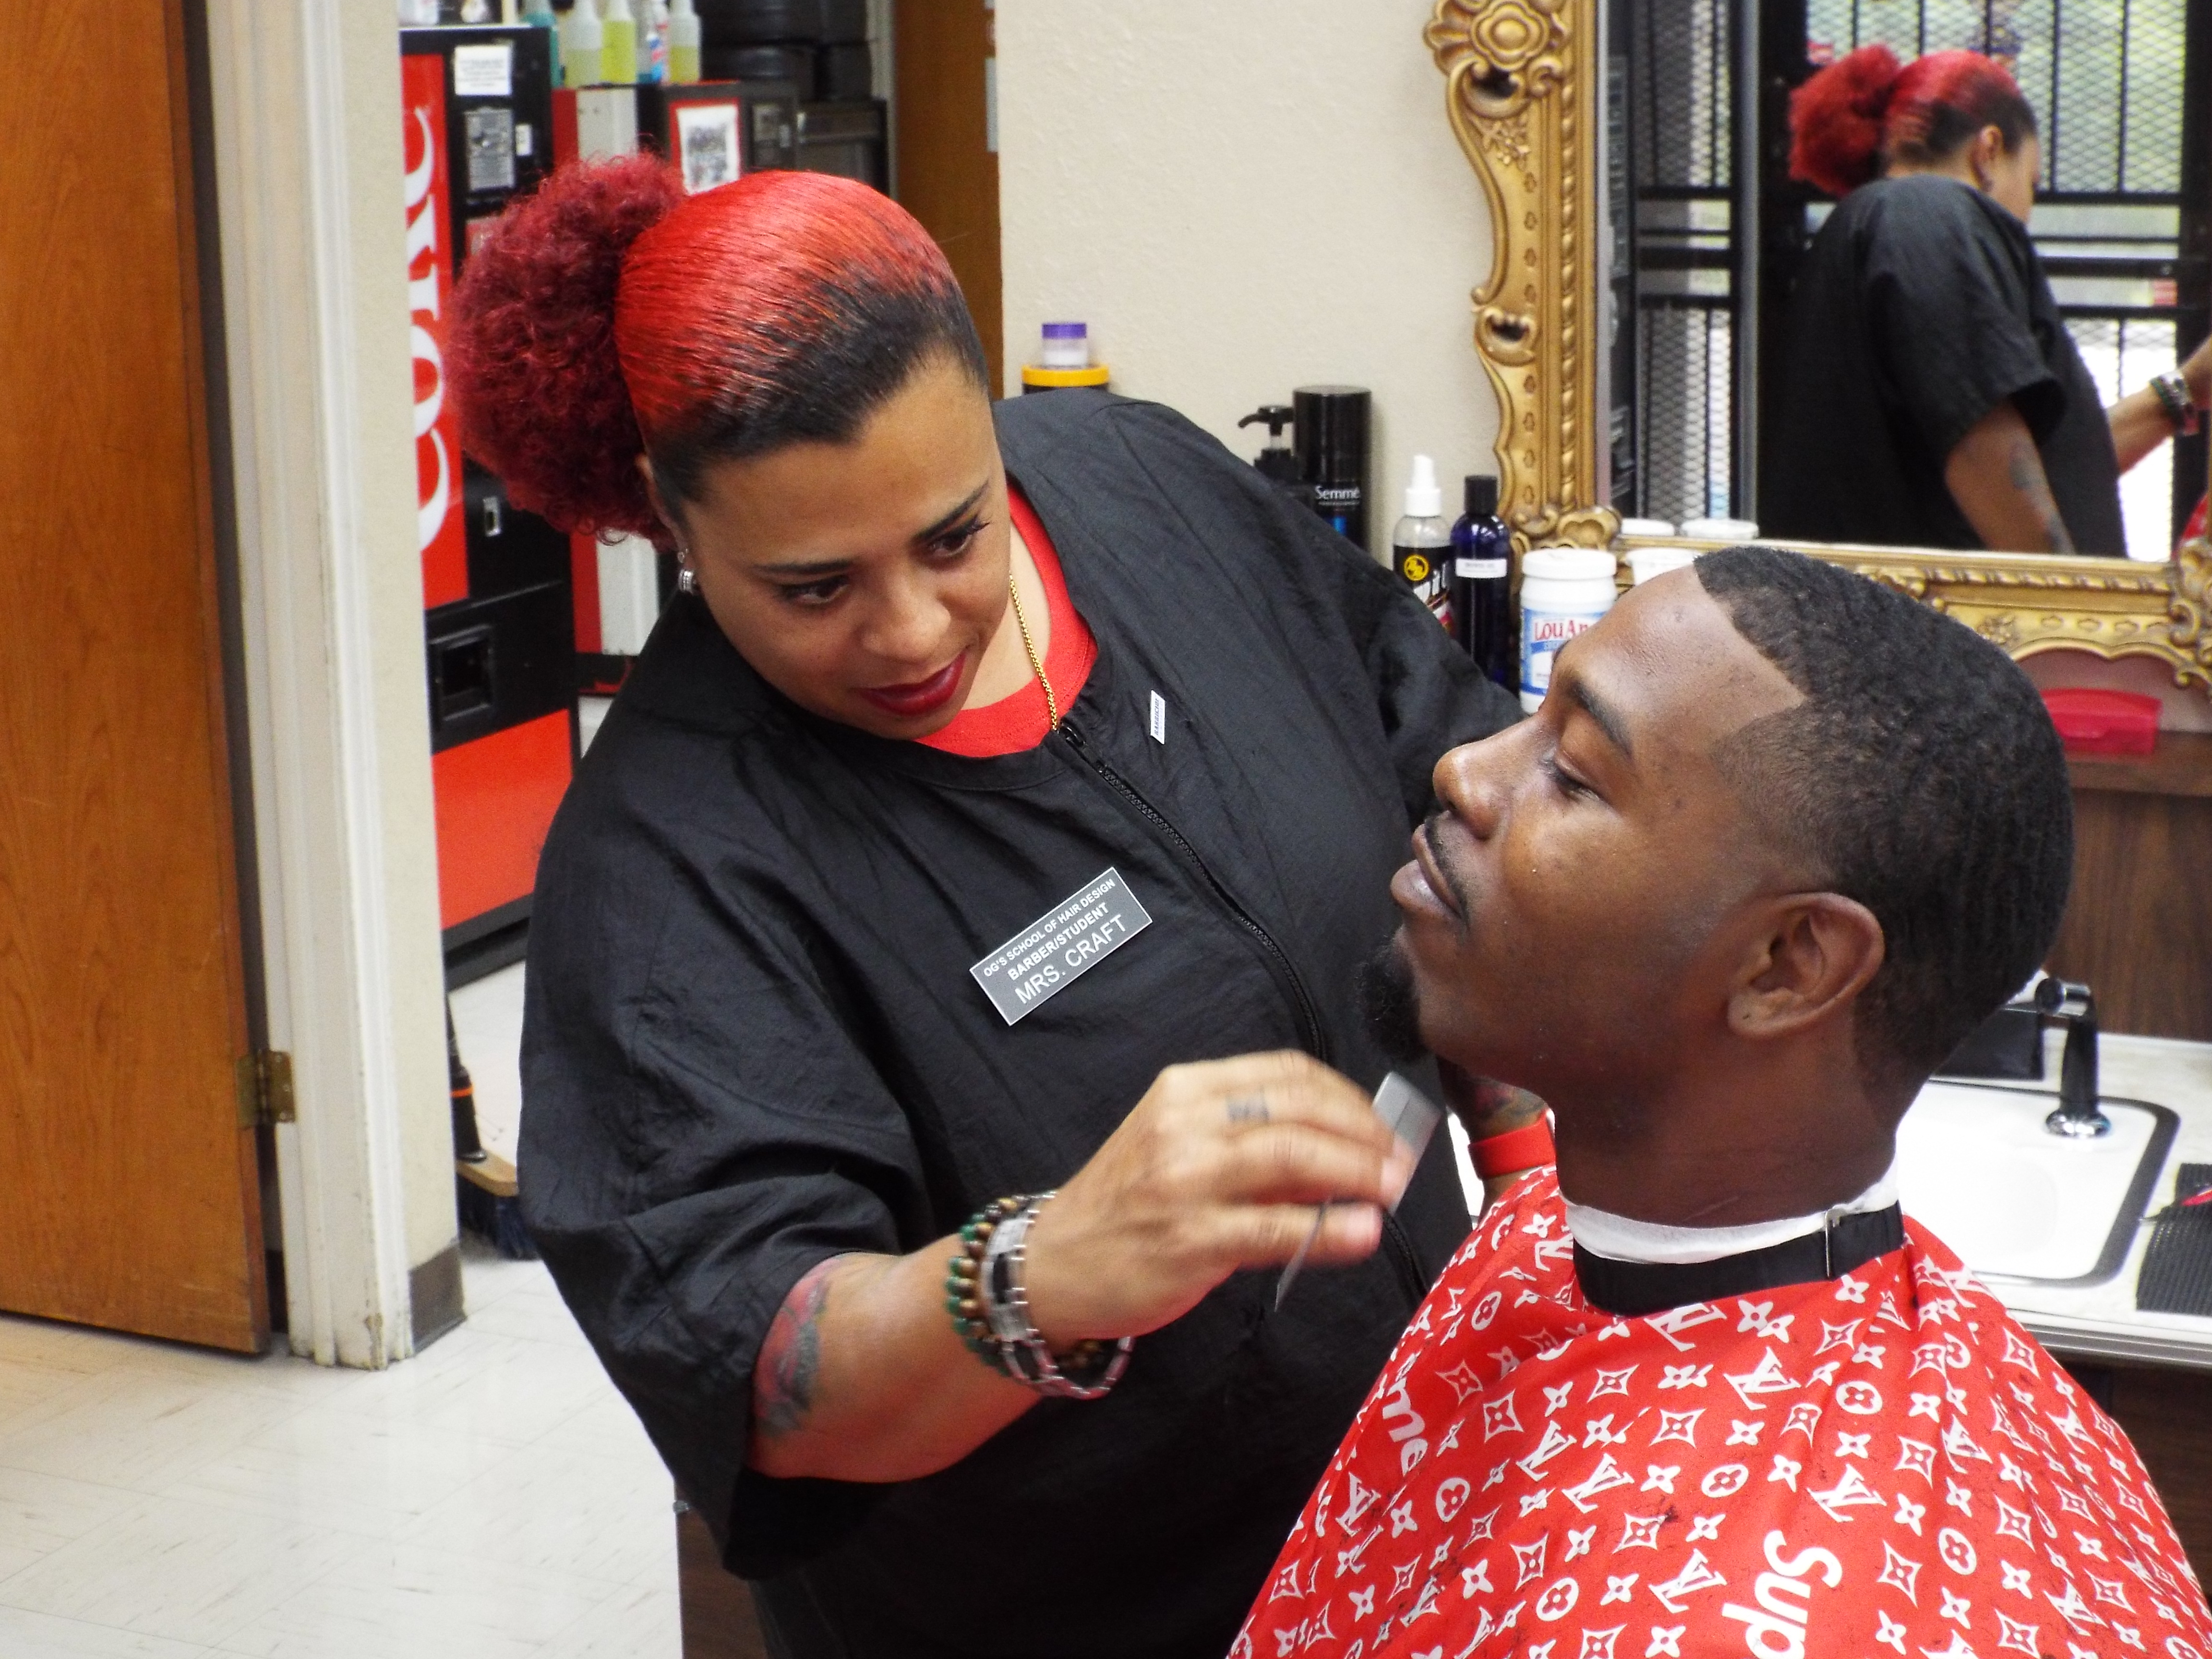 Why Are Barbershops a Great Place to Talk?